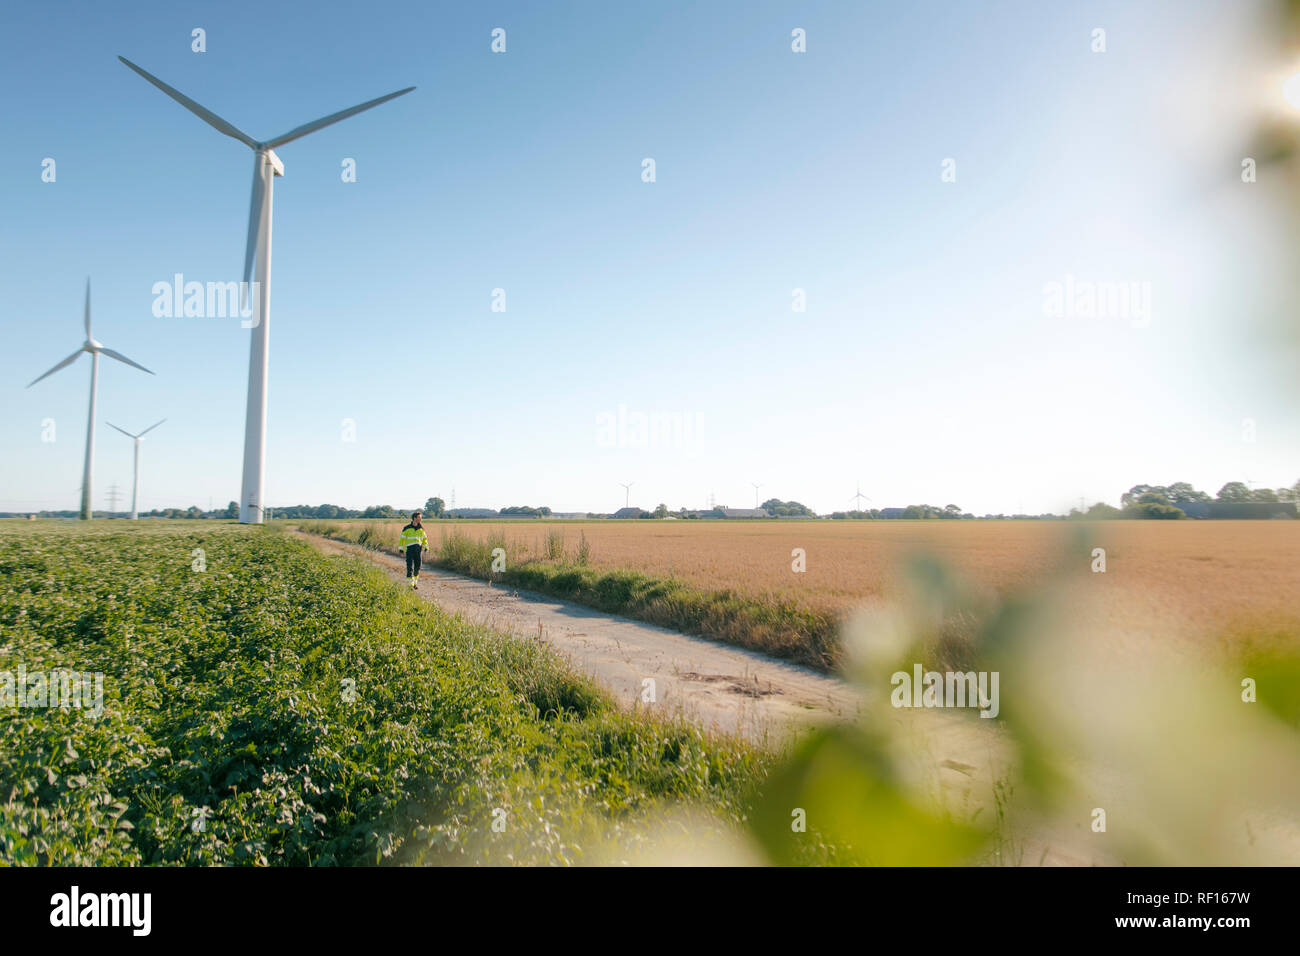 Engineer walking on field path at a wind farm Stock Photo